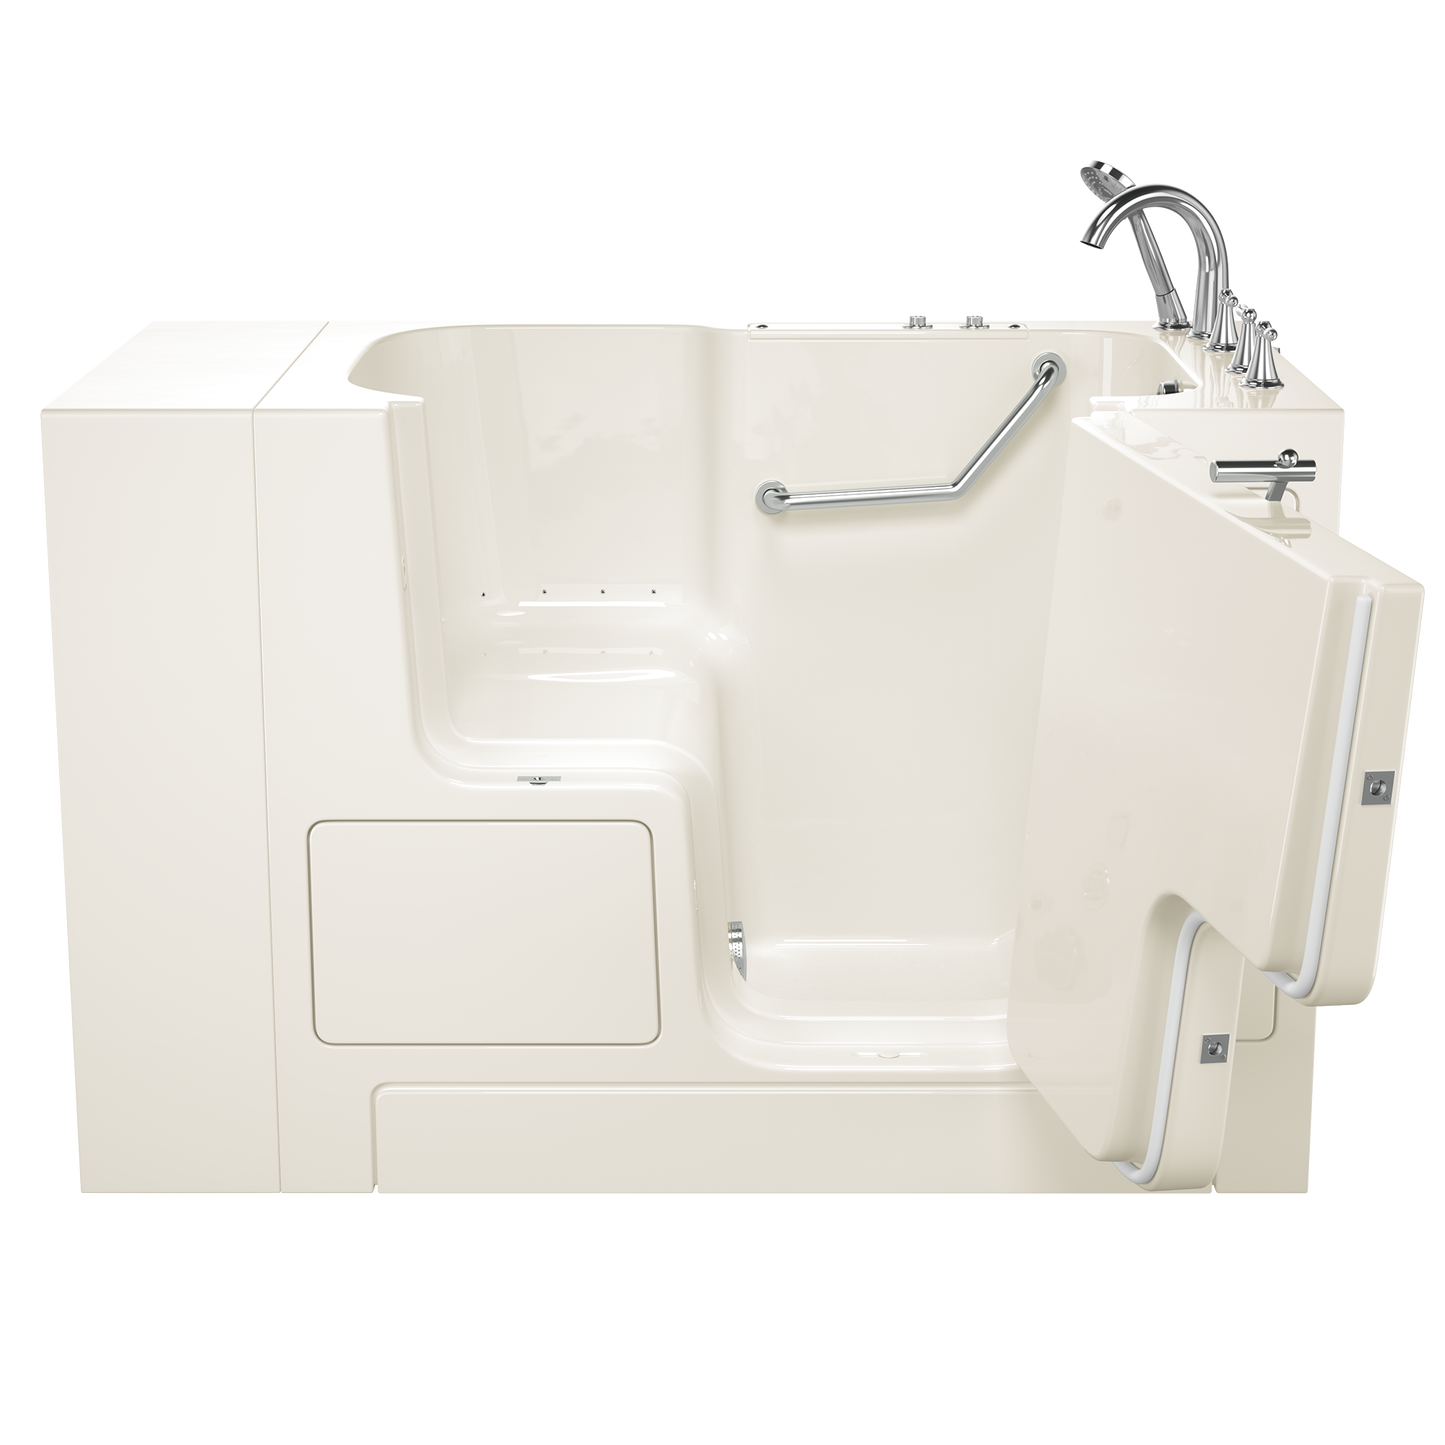 AMERICAN-STANDARD SS9OD5232RA-BC-PC, Gelcoat Premium Series 32 in. x 52 in. Outward Opening Door Walk-In Bathtub with Air Spa system in Wib Linen